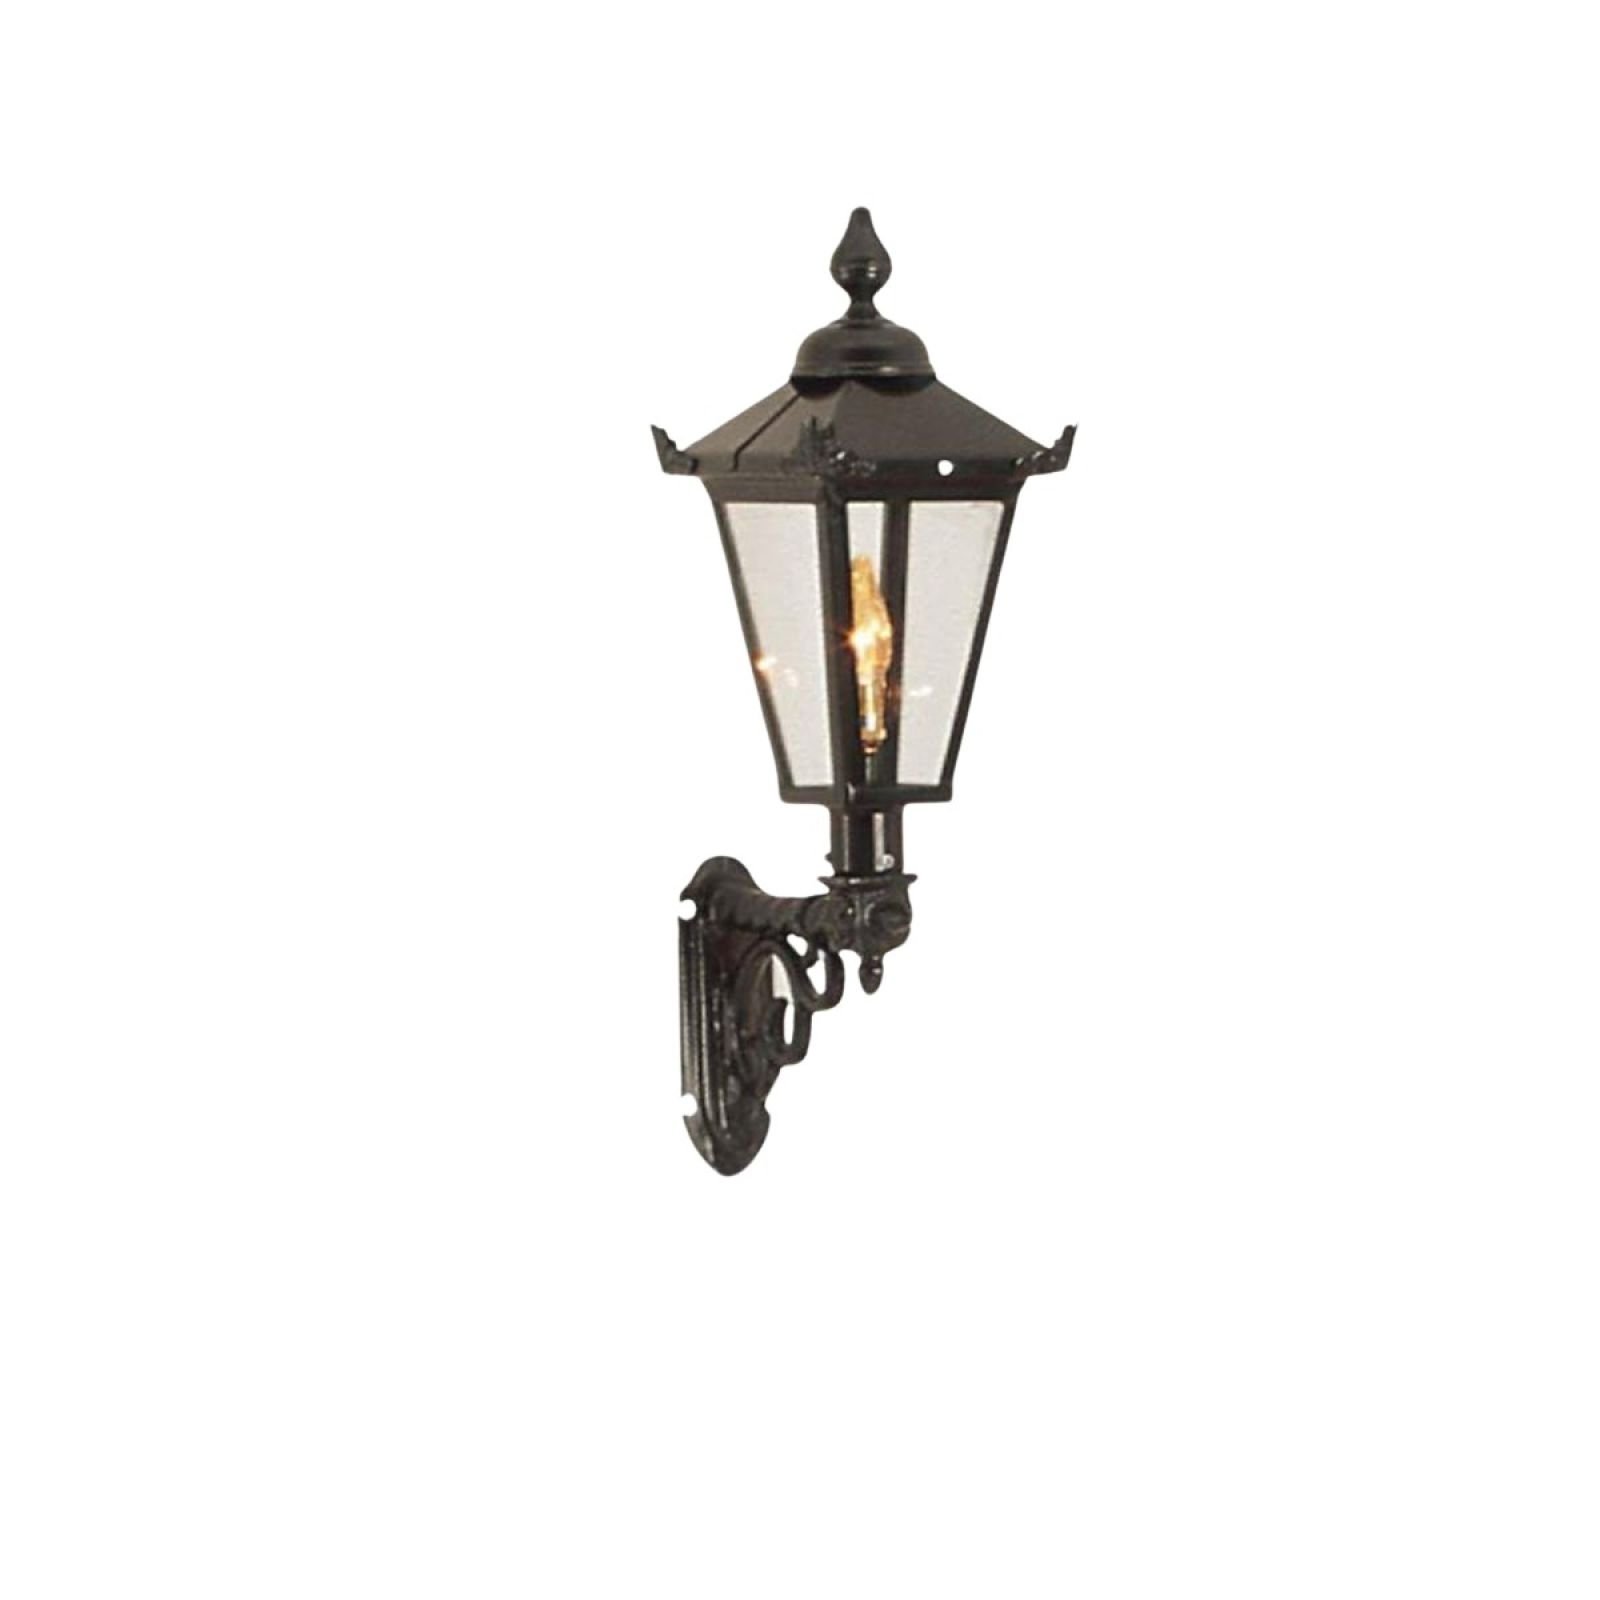 Small square meridien wall lantern with cast bracket